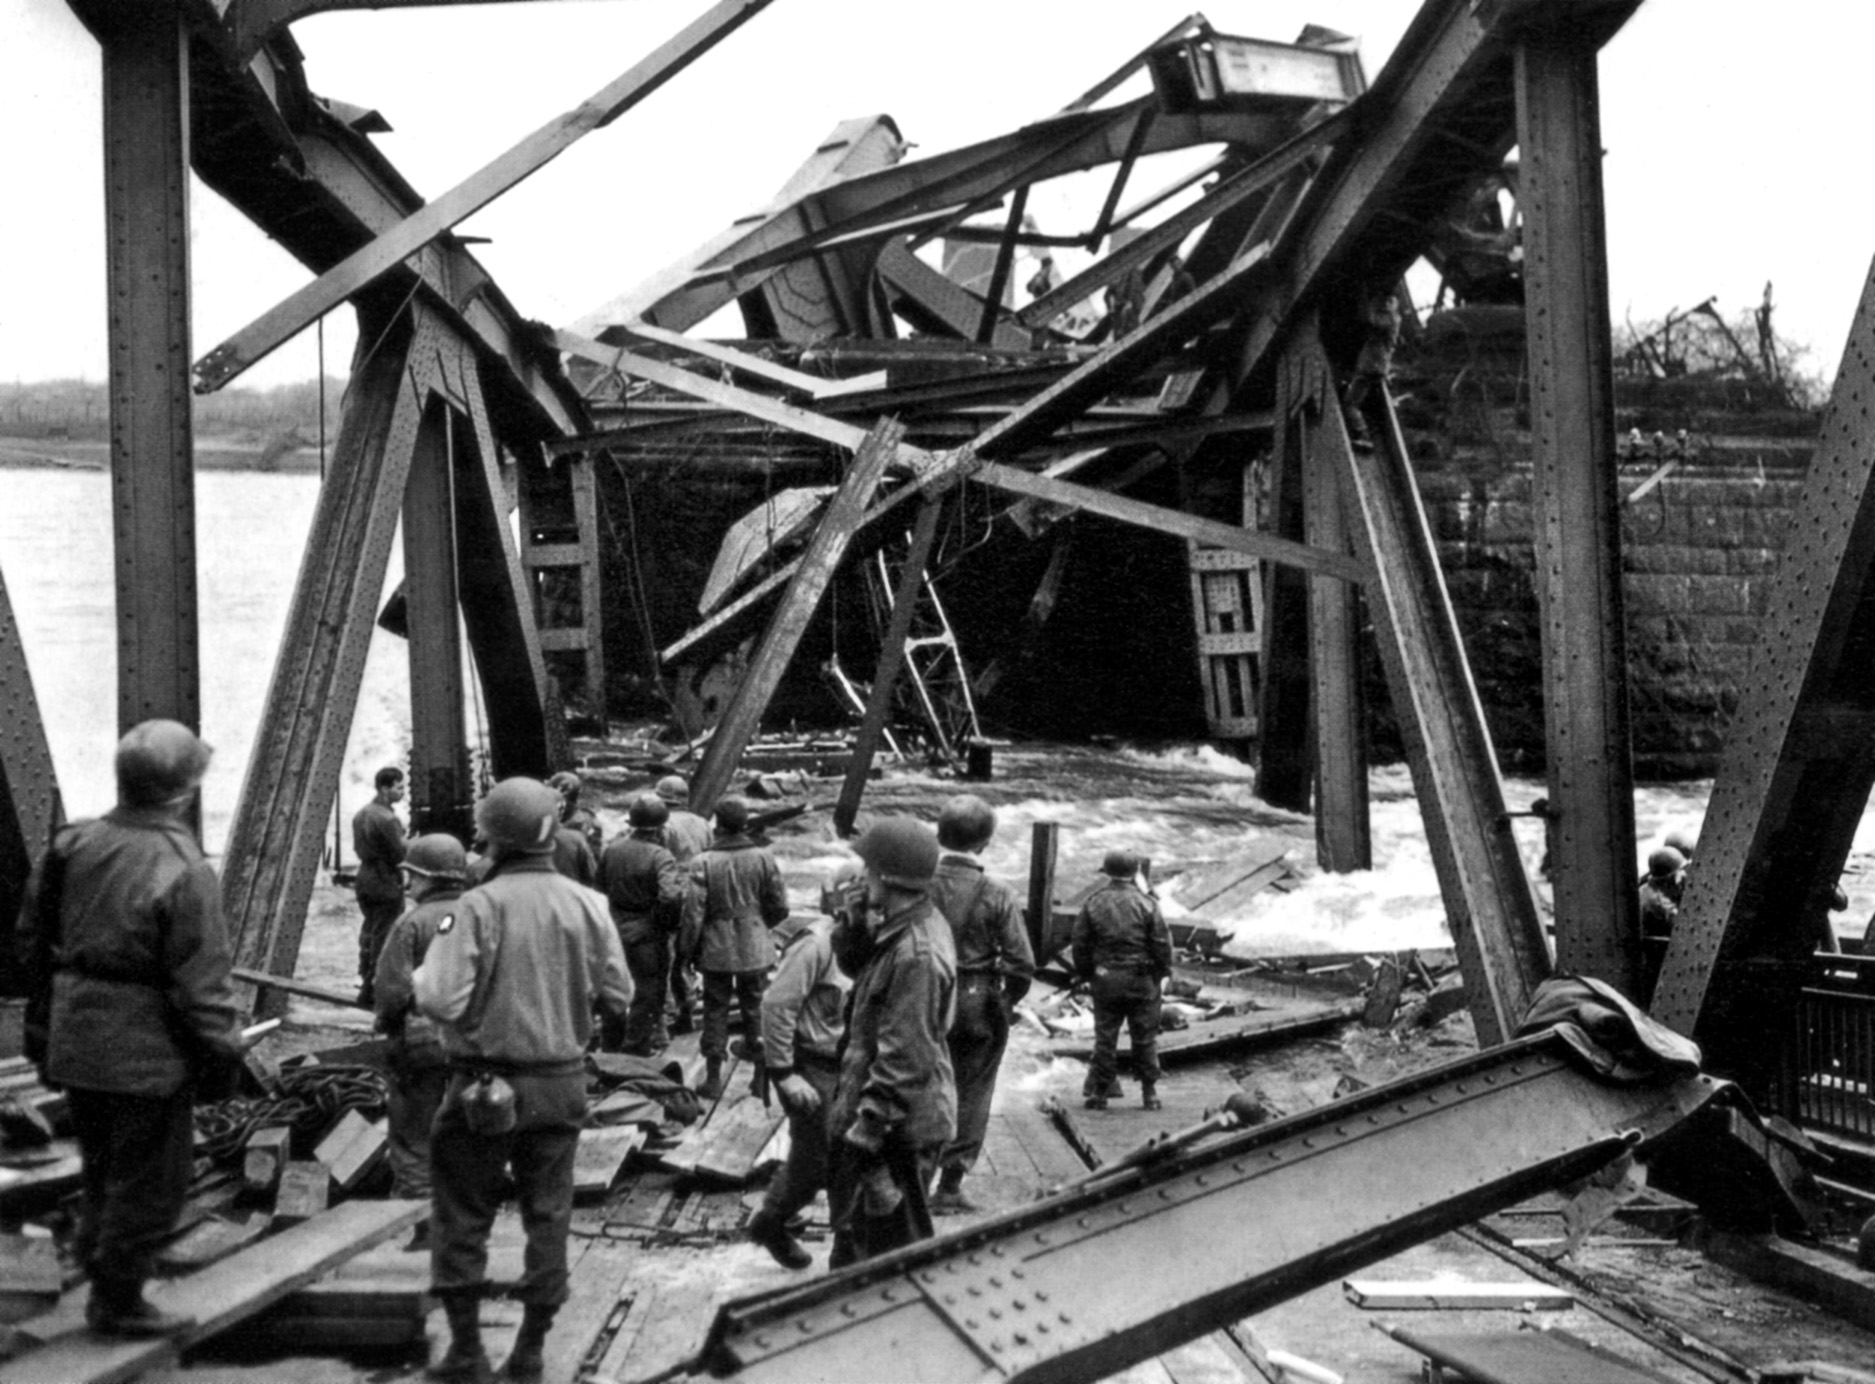 A mass of twisted steel is all that remains of the bridge after it crashed into the Rhine on March 17, 1945. Twenty-eight American soldiers were killed in the collapse of the structure just over a week after it was captured intact by the 9th Armored Division.